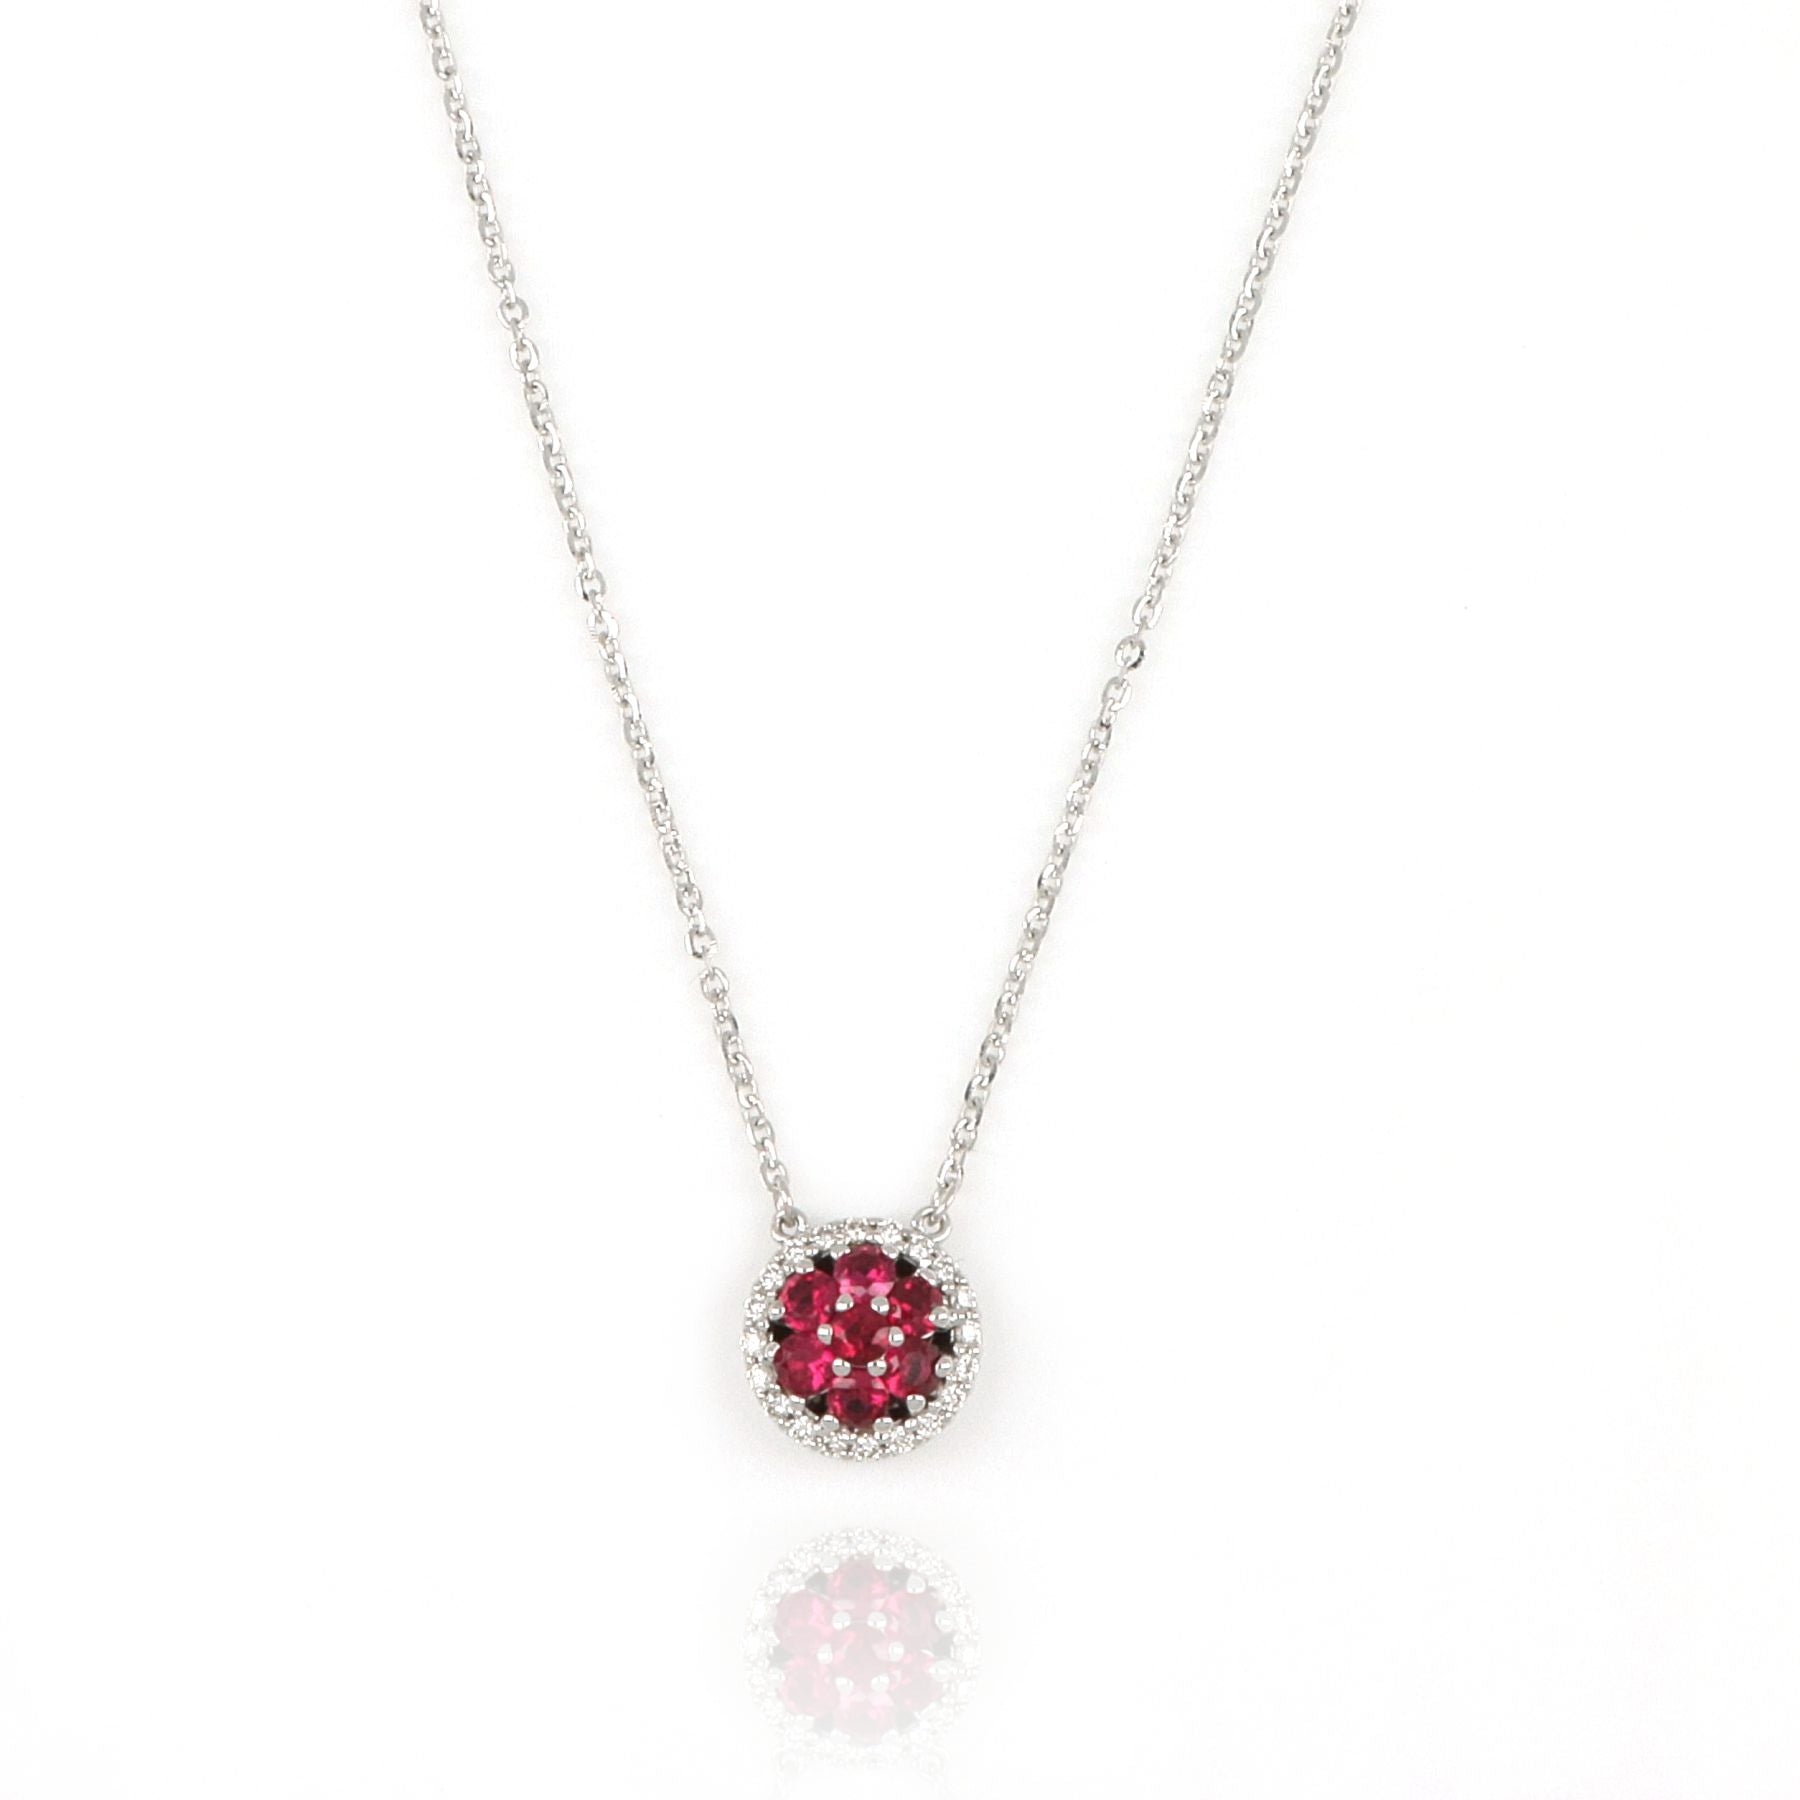 White Gold Necklace With Rubies And Diamonds